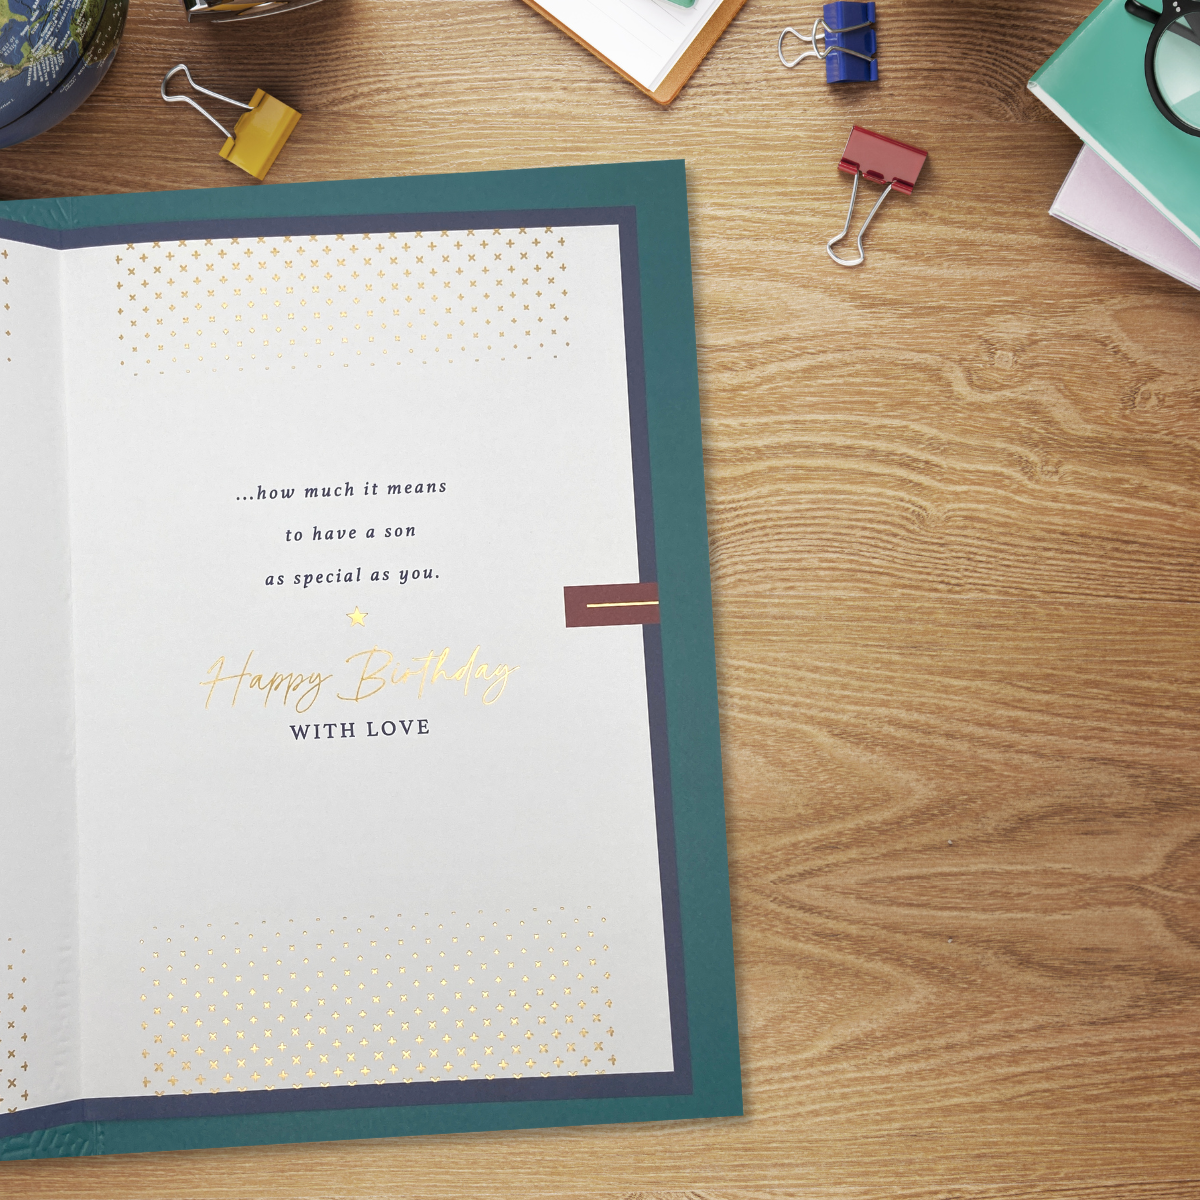 Inside image with colour printed insert, teal colour border and gold stars